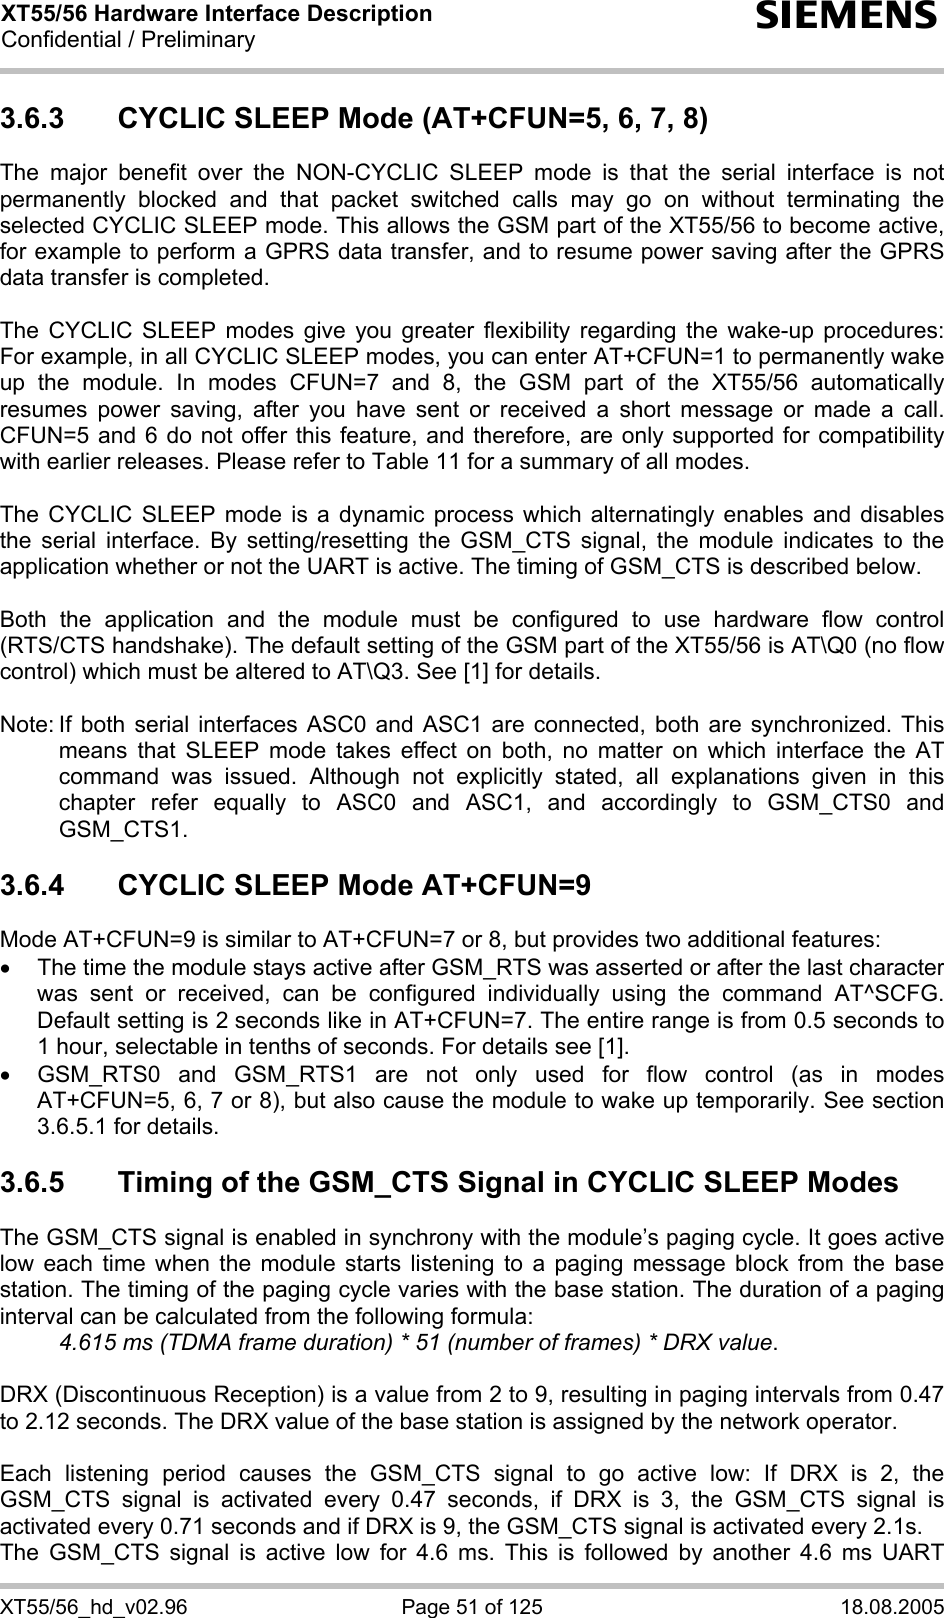 XT55/56 Hardware Interface Description Confidential / Preliminary s XT55/56_hd_v02.96  Page 51 of 125  18.08.2005 3.6.3  CYCLIC SLEEP Mode (AT+CFUN=5, 6, 7, 8) The major benefit over the NON-CYCLIC SLEEP mode is that the serial interface is not permanently blocked and that packet switched calls may go on without terminating the selected CYCLIC SLEEP mode. This allows the GSM part of the XT55/56 to become active, for example to perform a GPRS data transfer, and to resume power saving after the GPRS data transfer is completed.  The CYCLIC SLEEP modes give you greater flexibility regarding the wake-up procedures: For example, in all CYCLIC SLEEP modes, you can enter AT+CFUN=1 to permanently wake up the module. In modes CFUN=7 and 8, the GSM part of the XT55/56 automatically resumes power saving, after you have sent or received a short message or made a call. CFUN=5 and 6 do not offer this feature, and therefore, are only supported for compatibility with earlier releases. Please refer to Table 11 for a summary of all modes.  The CYCLIC SLEEP mode is a dynamic process which alternatingly enables and disables the serial interface. By setting/resetting the GSM_CTS signal, the module indicates to the application whether or not the UART is active. The timing of GSM_CTS is described below.   Both the application and the module must be configured to use hardware flow control (RTS/CTS handshake). The default setting of the GSM part of the XT55/56 is AT\Q0 (no flow control) which must be altered to AT\Q3. See [1] for details.  Note: If both serial interfaces ASC0 and ASC1 are connected, both are synchronized. This means that SLEEP mode takes effect on both, no matter on which interface the AT command was issued. Although not explicitly stated, all explanations given in this chapter refer equally to ASC0 and ASC1, and accordingly to GSM_CTS0 and GSM_CTS1.  3.6.4  CYCLIC SLEEP Mode AT+CFUN=9 Mode AT+CFUN=9 is similar to AT+CFUN=7 or 8, but provides two additional features:  •  The time the module stays active after GSM_RTS was asserted or after the last character was sent or received, can be configured individually using the command AT^SCFG. Default setting is 2 seconds like in AT+CFUN=7. The entire range is from 0.5 seconds to 1 hour, selectable in tenths of seconds. For details see [1]. •  GSM_RTS0 and GSM_RTS1 are not only used for flow control (as in modes AT+CFUN=5, 6, 7 or 8), but also cause the module to wake up temporarily. See section 3.6.5.1 for details. 3.6.5  Timing of the GSM_CTS Signal in CYCLIC SLEEP Modes The GSM_CTS signal is enabled in synchrony with the module’s paging cycle. It goes active low each time when the module starts listening to a paging message block from the base station. The timing of the paging cycle varies with the base station. The duration of a paging interval can be calculated from the following formula:  4.615 ms (TDMA frame duration) * 51 (number of frames) * DRX value.   DRX (Discontinuous Reception) is a value from 2 to 9, resulting in paging intervals from 0.47 to 2.12 seconds. The DRX value of the base station is assigned by the network operator.   Each listening period causes the GSM_CTS signal to go active low: If DRX is 2, the GSM_CTS signal is activated every 0.47 seconds, if DRX is 3, the GSM_CTS signal is activated every 0.71 seconds and if DRX is 9, the GSM_CTS signal is activated every 2.1s. The GSM_CTS signal is active low for 4.6 ms. This is followed by another 4.6 ms UART 